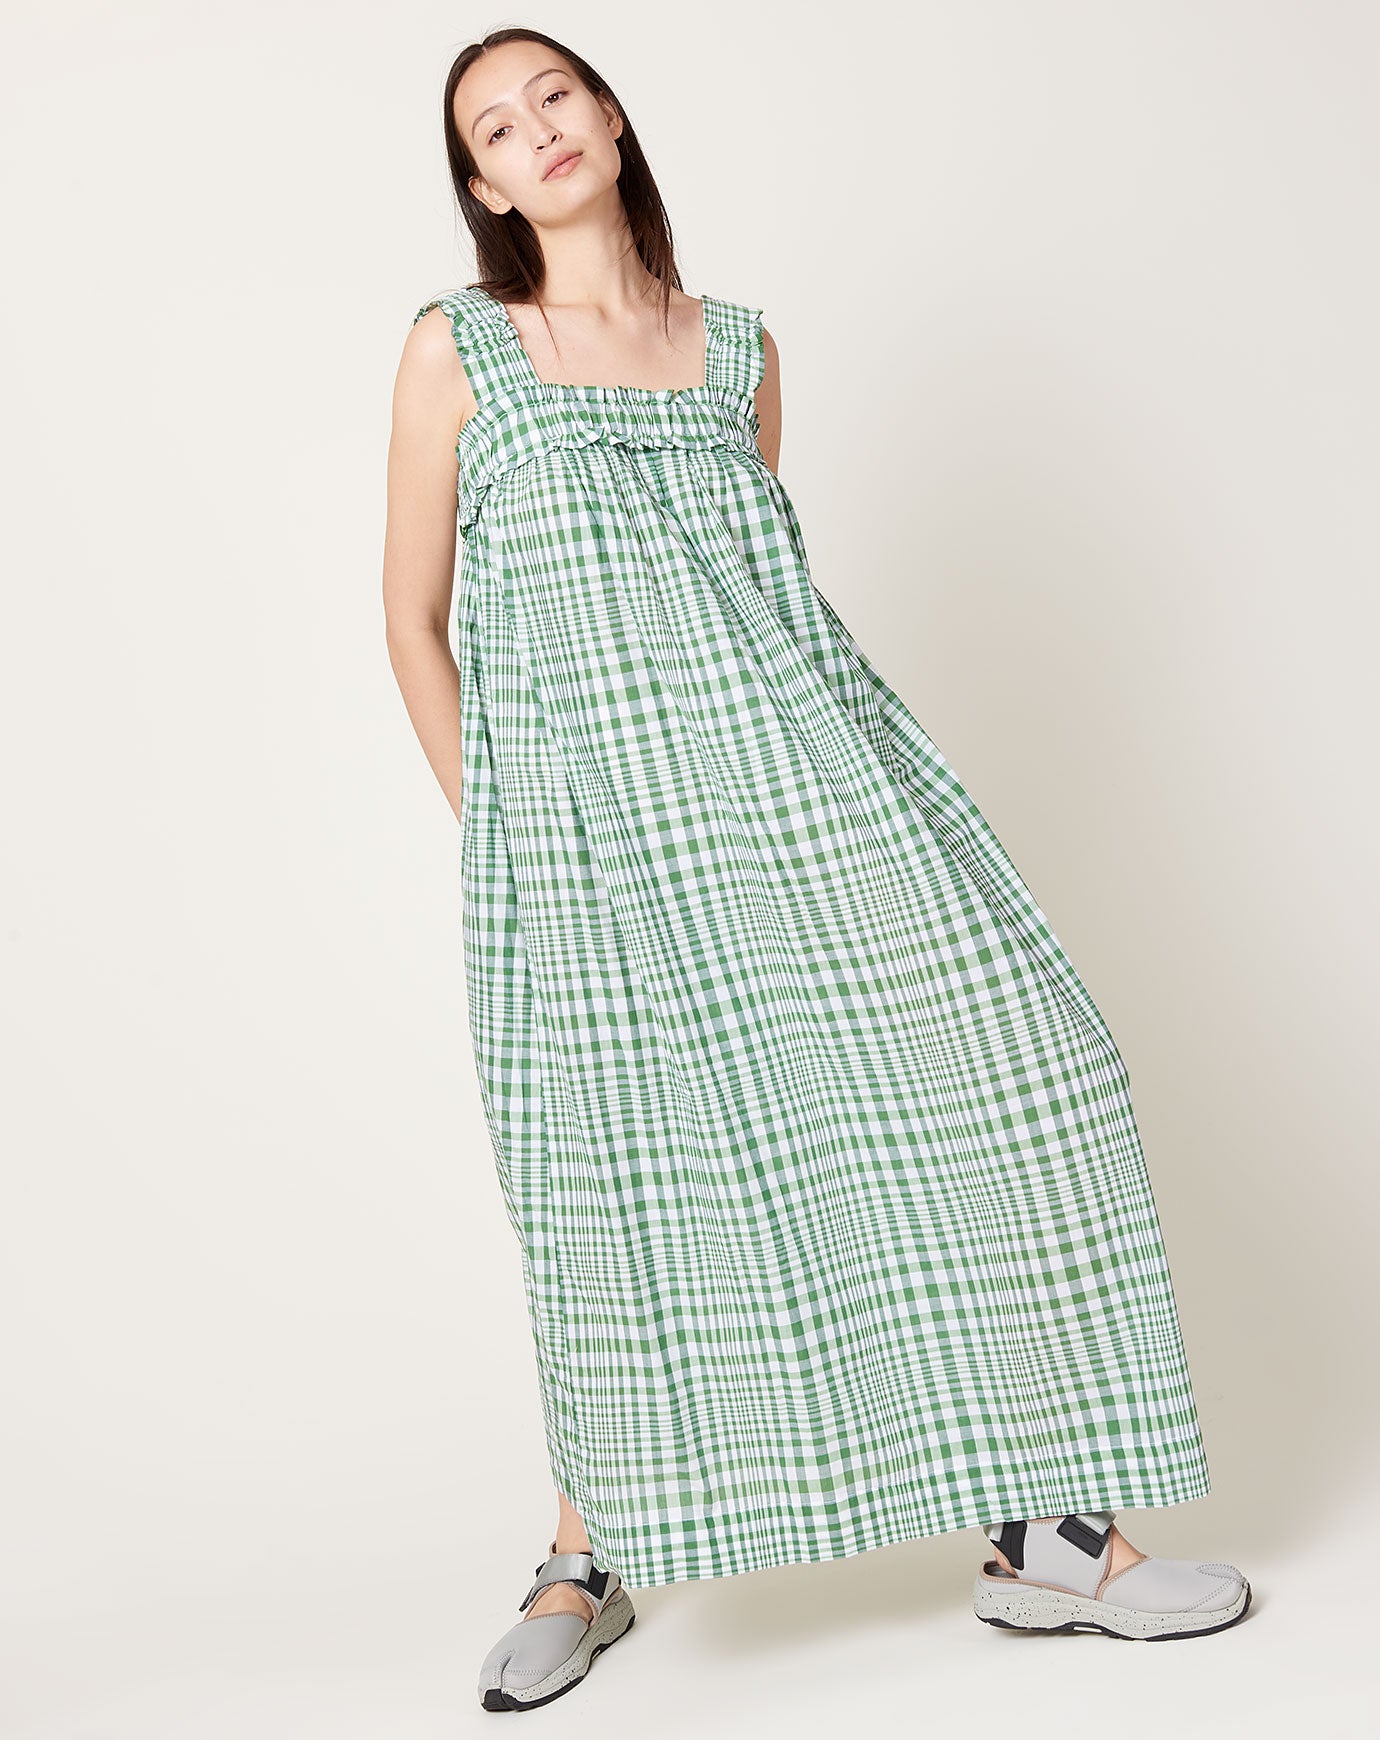 Kowtow Orchard Dress in Field Check